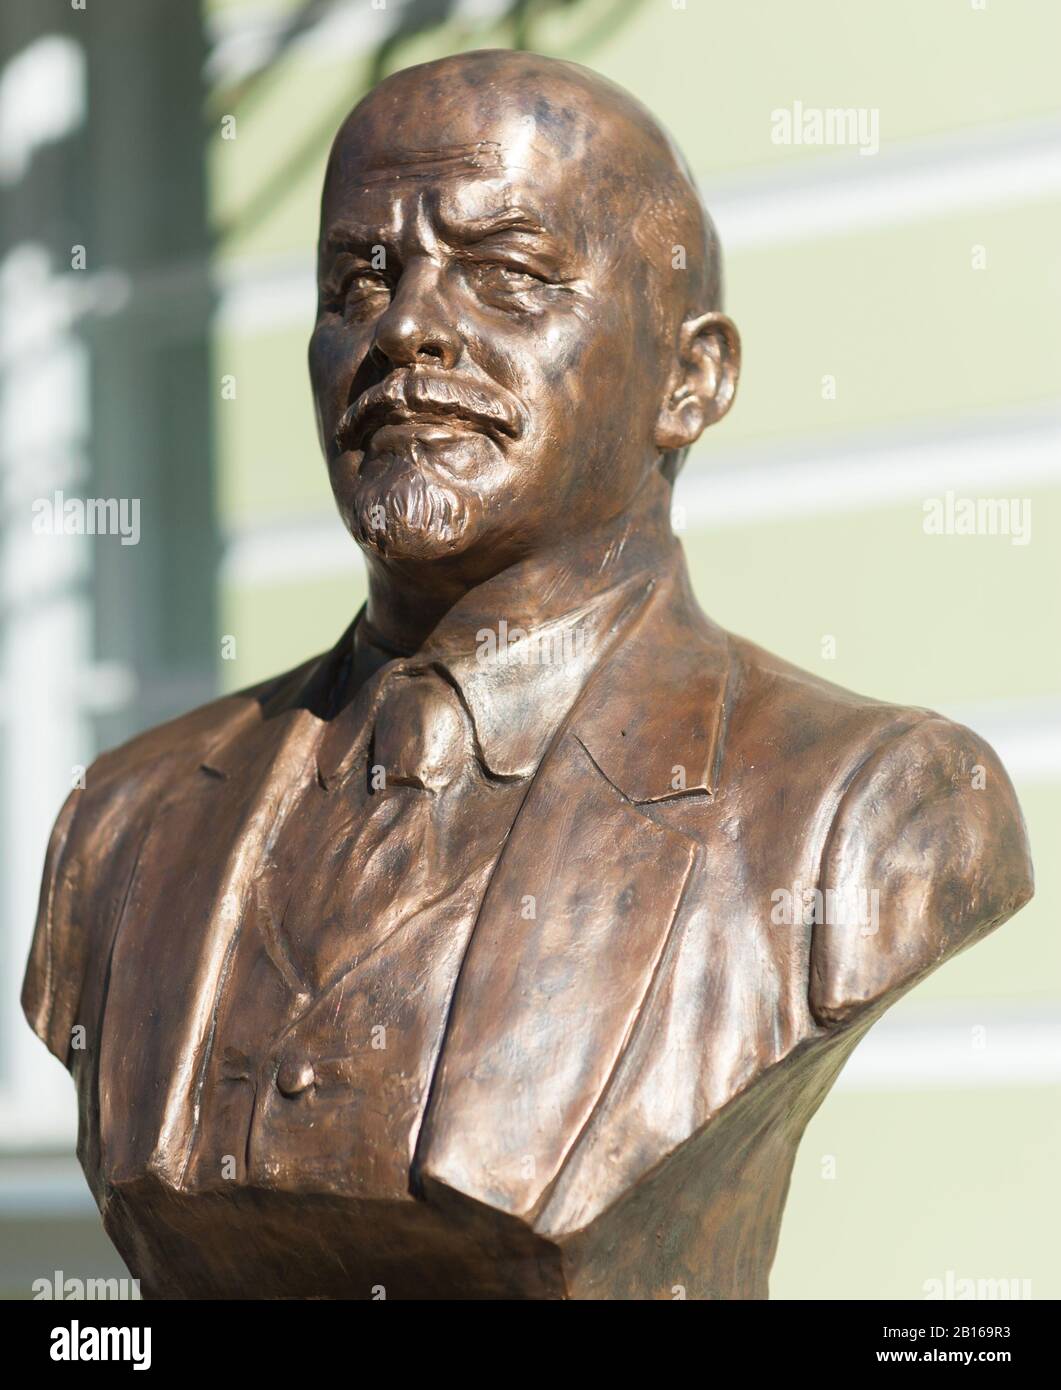 September 23, 2017 Moscow Russia Bust Chairman of the Council of People's Commissars of the USSR Vladimir Lenin made Zurab Tsereteli at the Rulers All Stock Photo